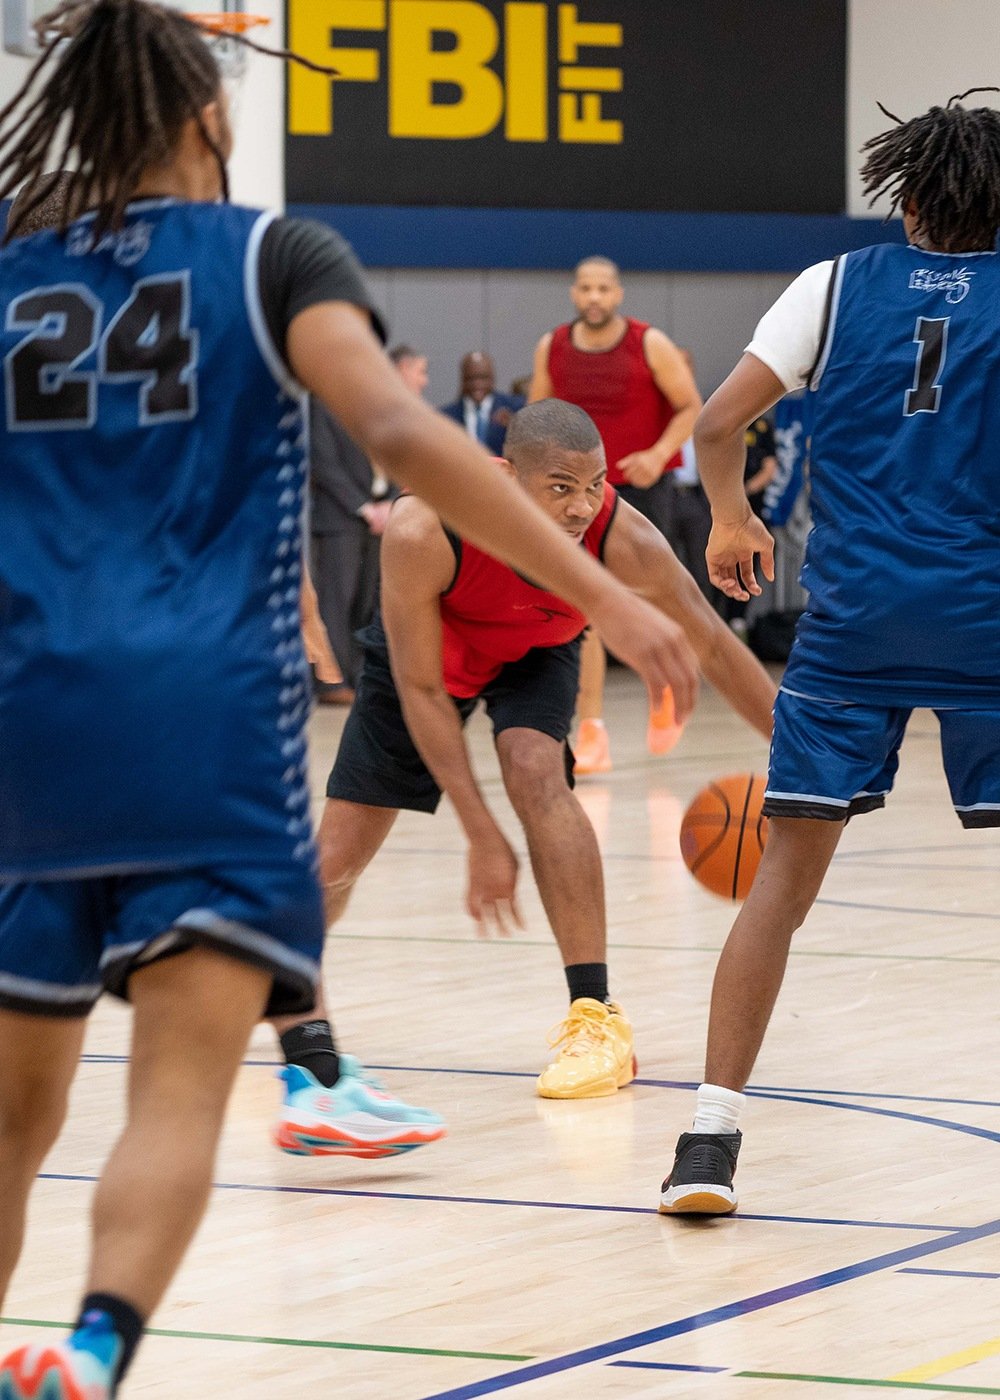 An FBI player dribbles a basketball in a community outreach event at FBI Headquarters on January 26, 2024.